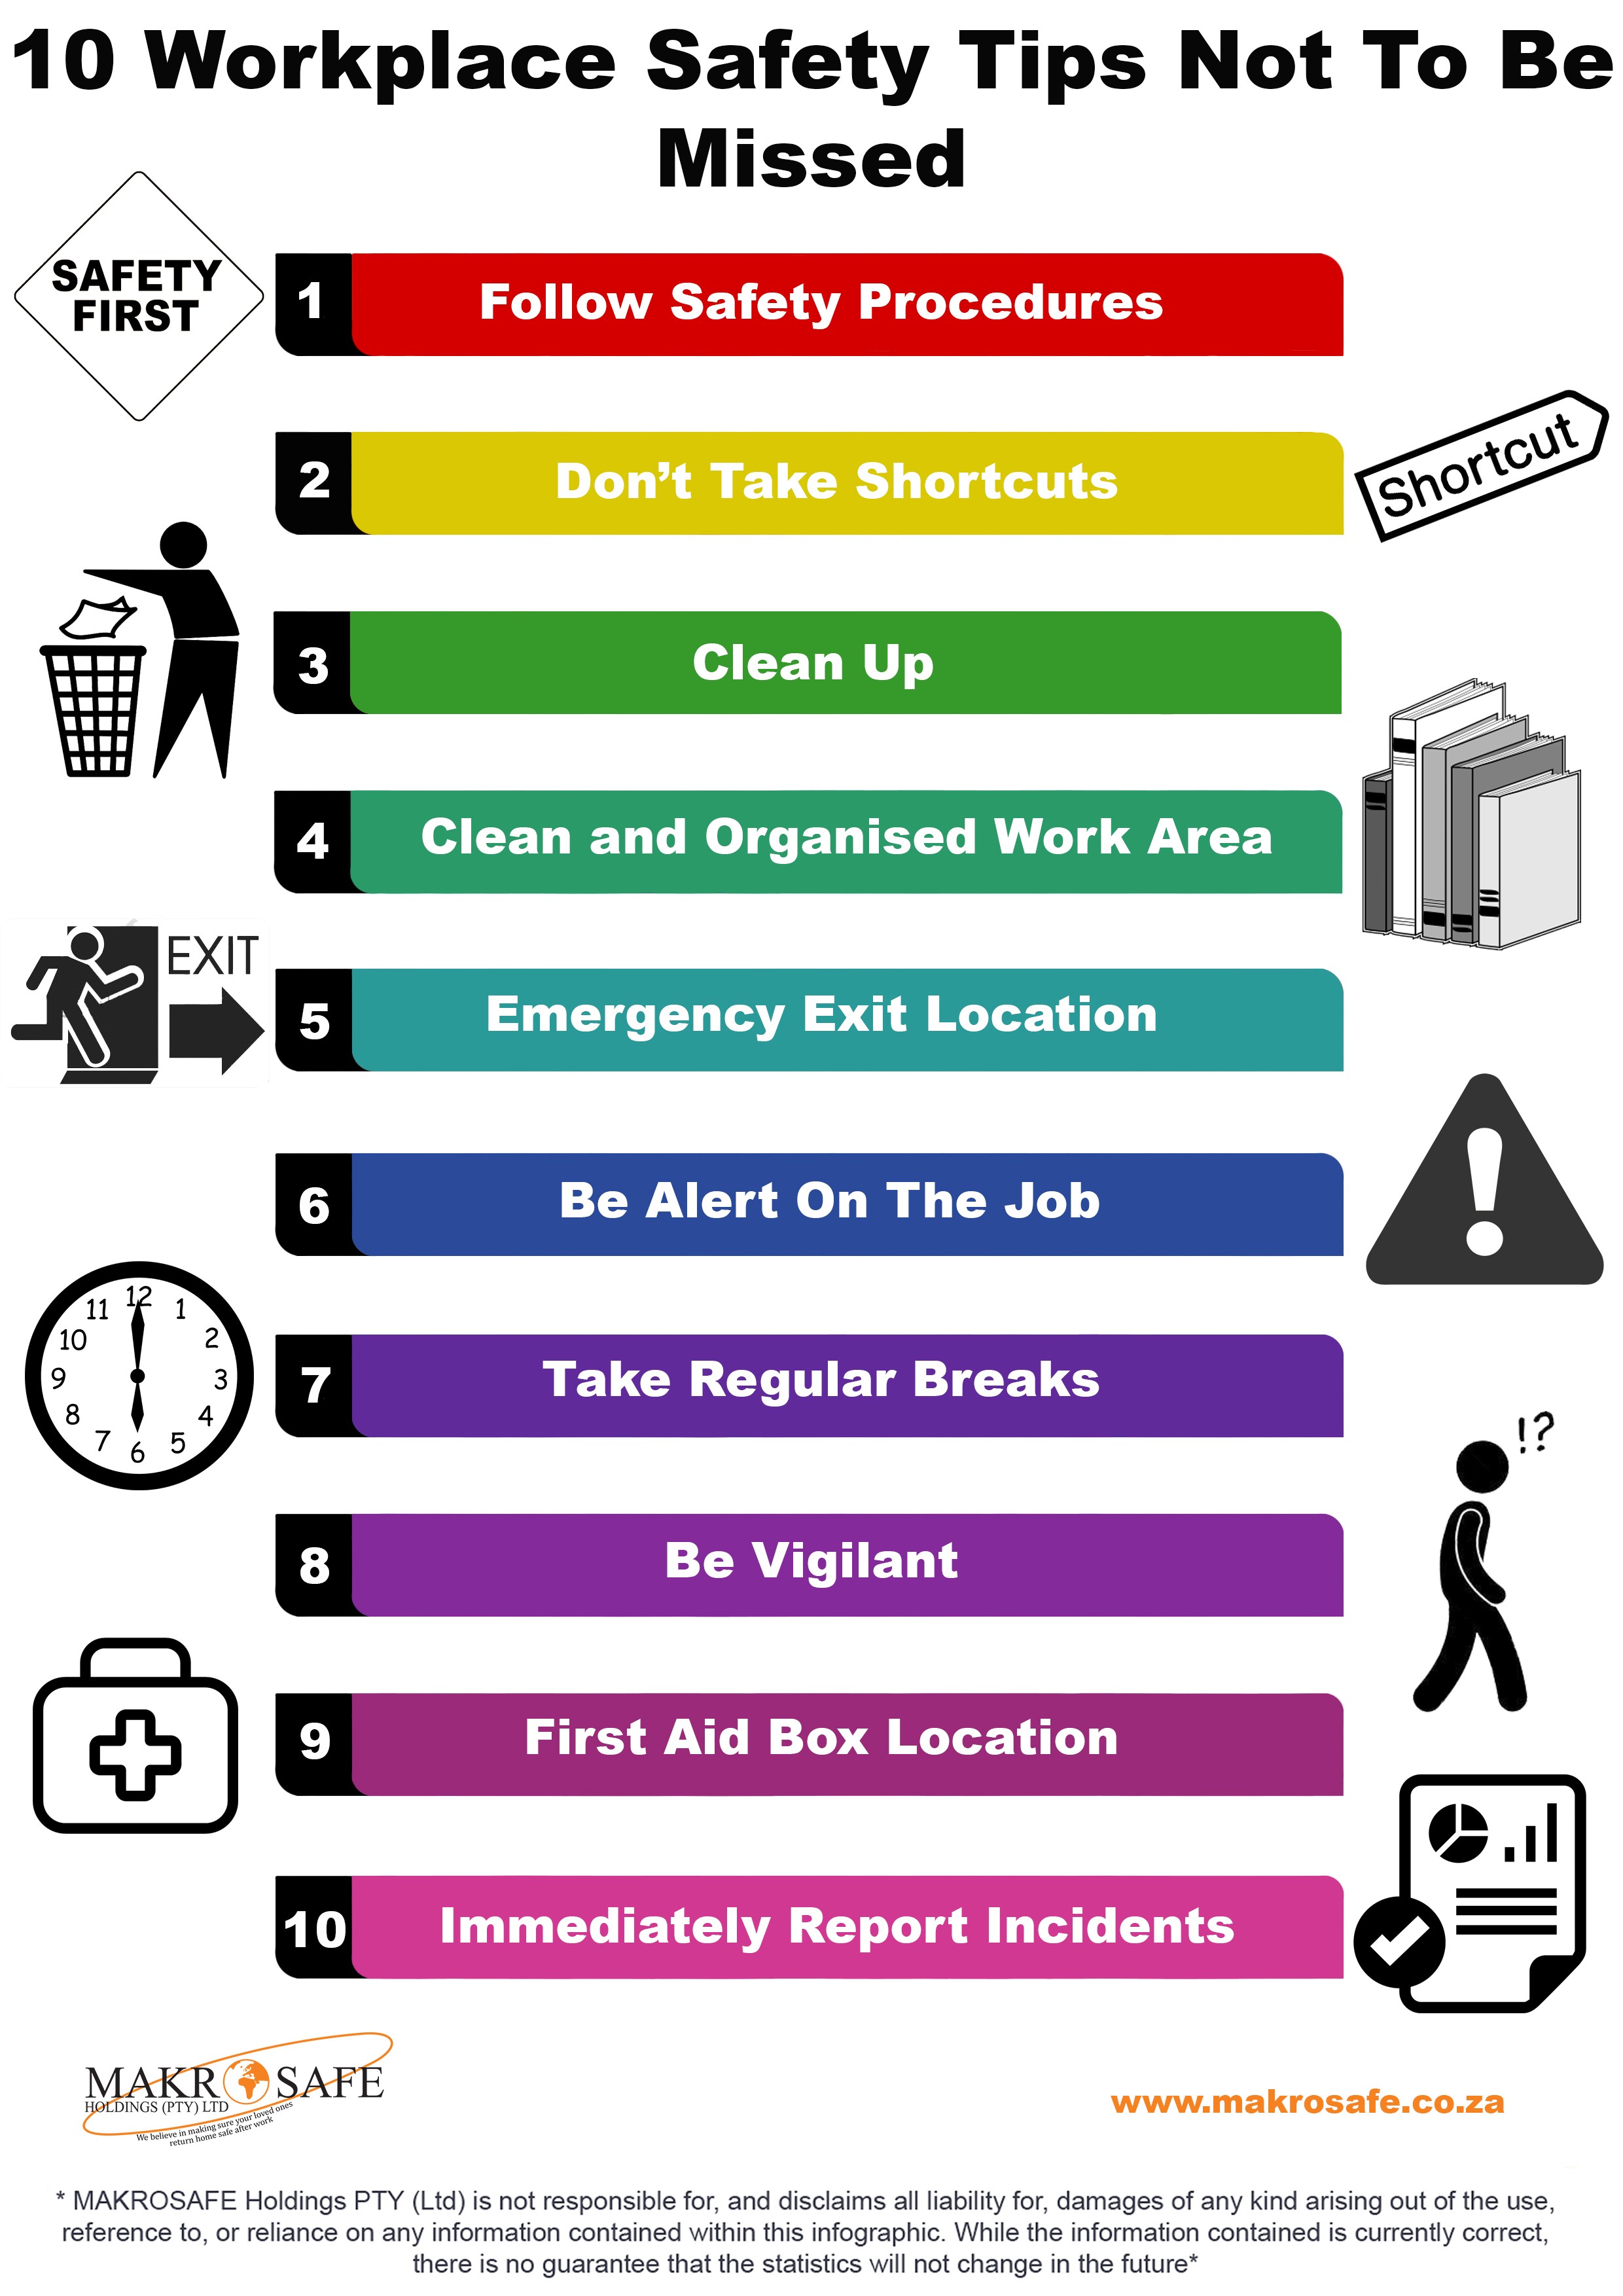 10 Workplace Safety Tips Gwg - Riset